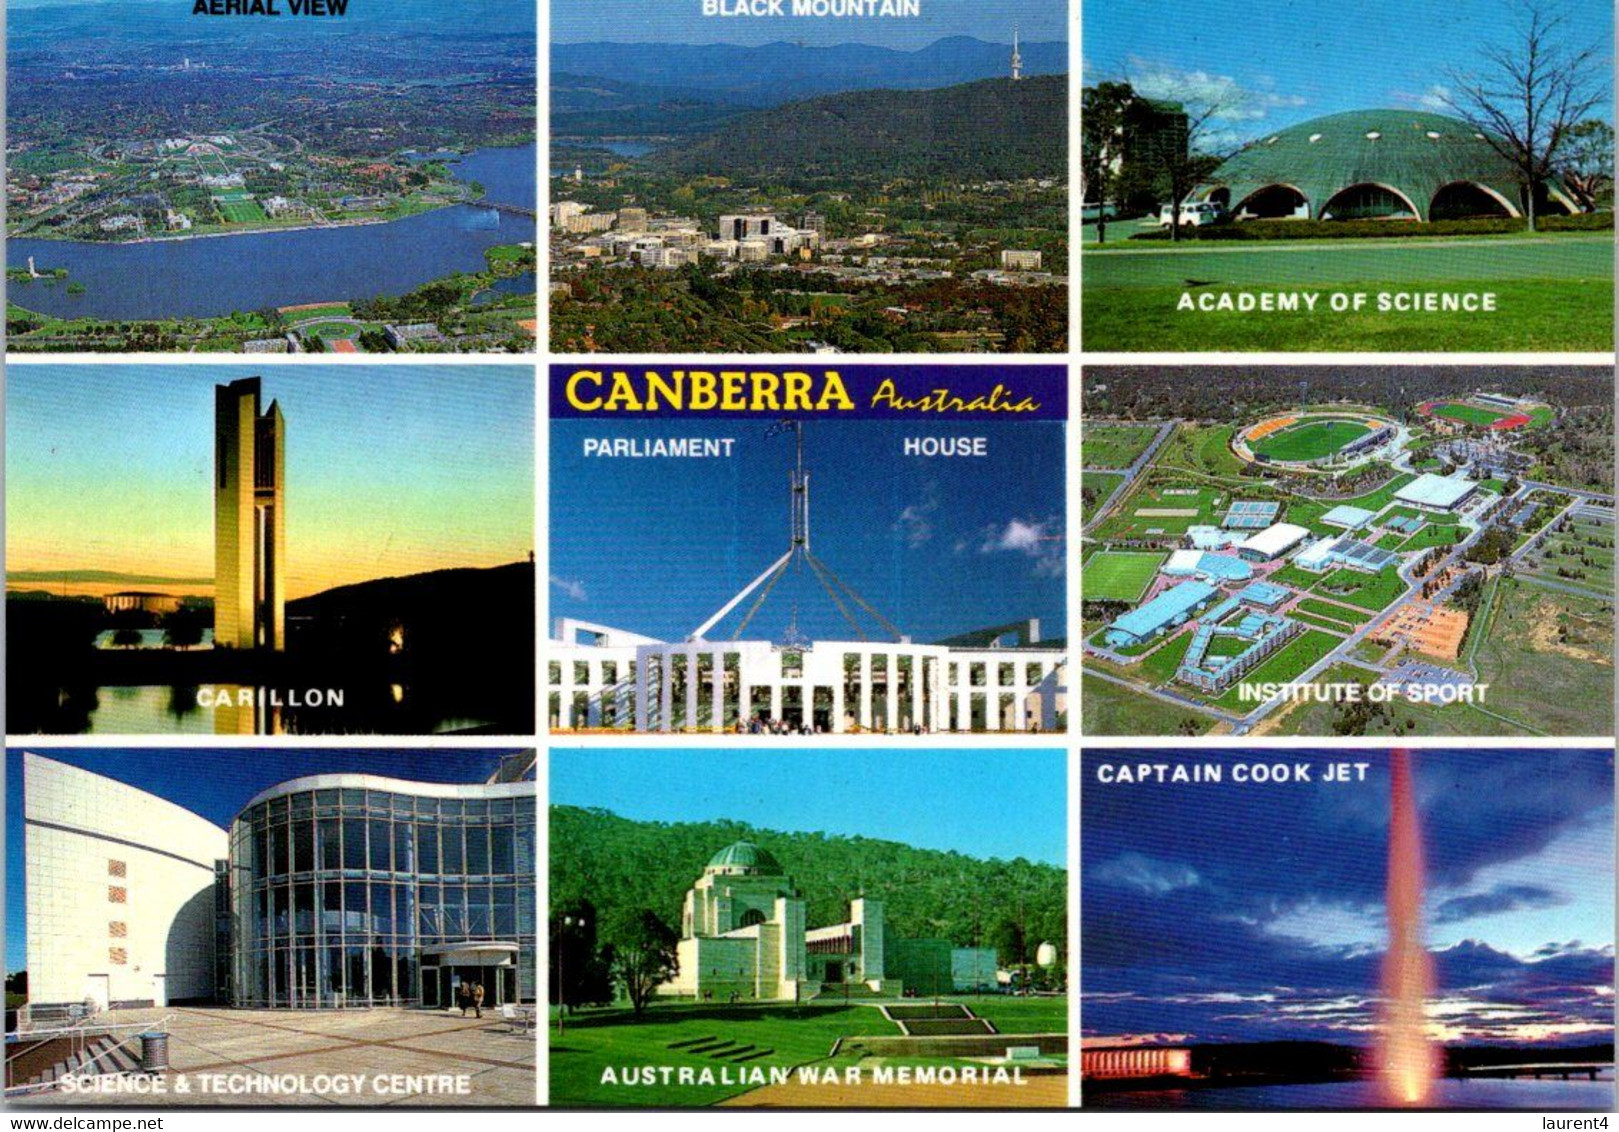 (2 Oø 5) Australia - ACT - Canberra (9 Views) Day & Night - Canberra (ACT)